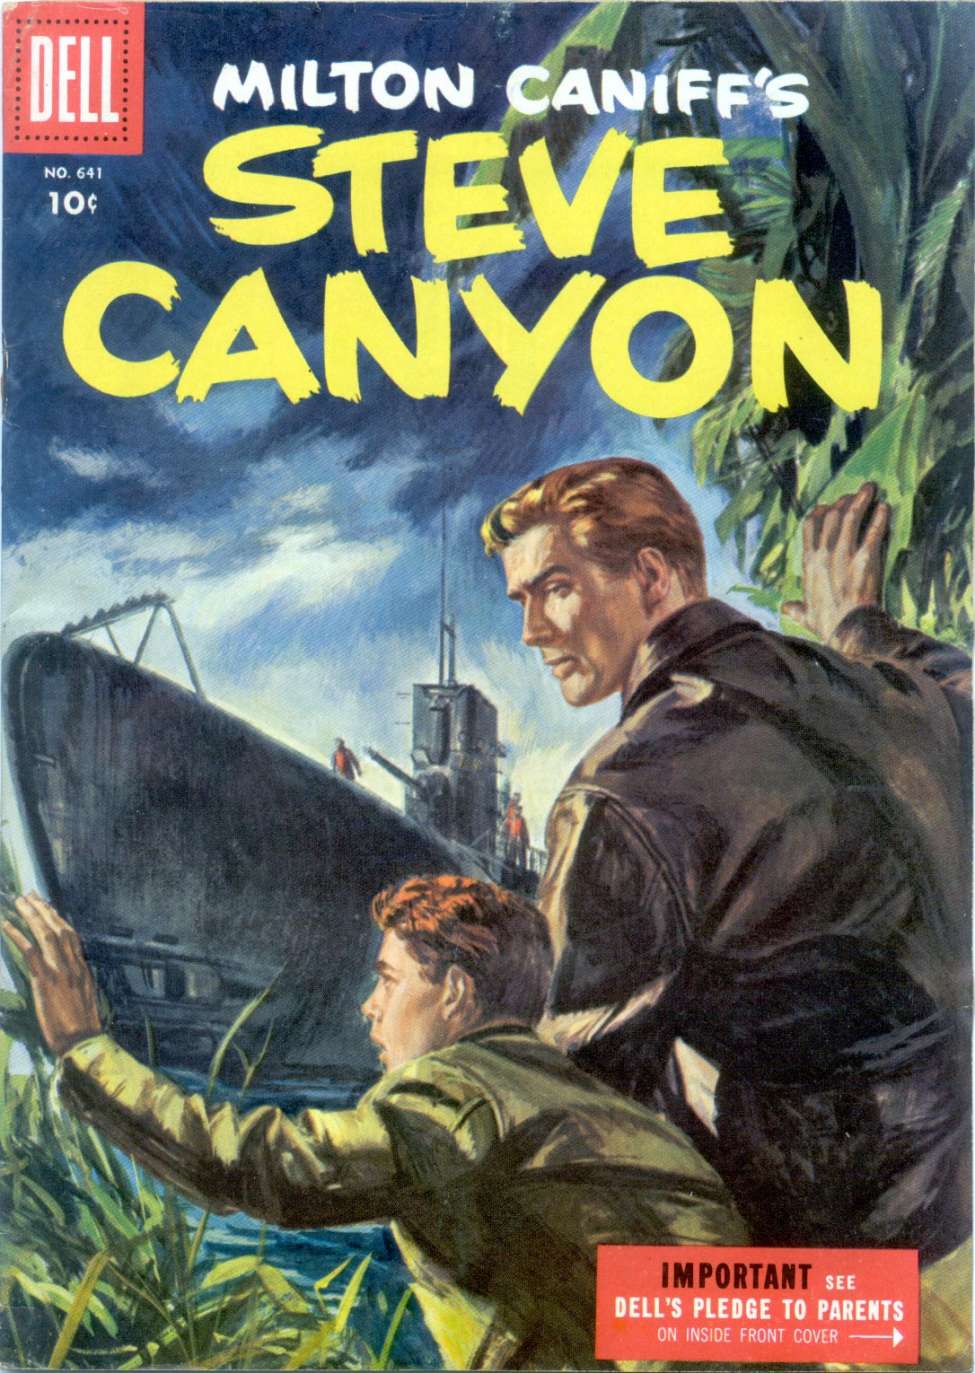 Book Cover For 0641 - Milton Caniff's Steve Canyon